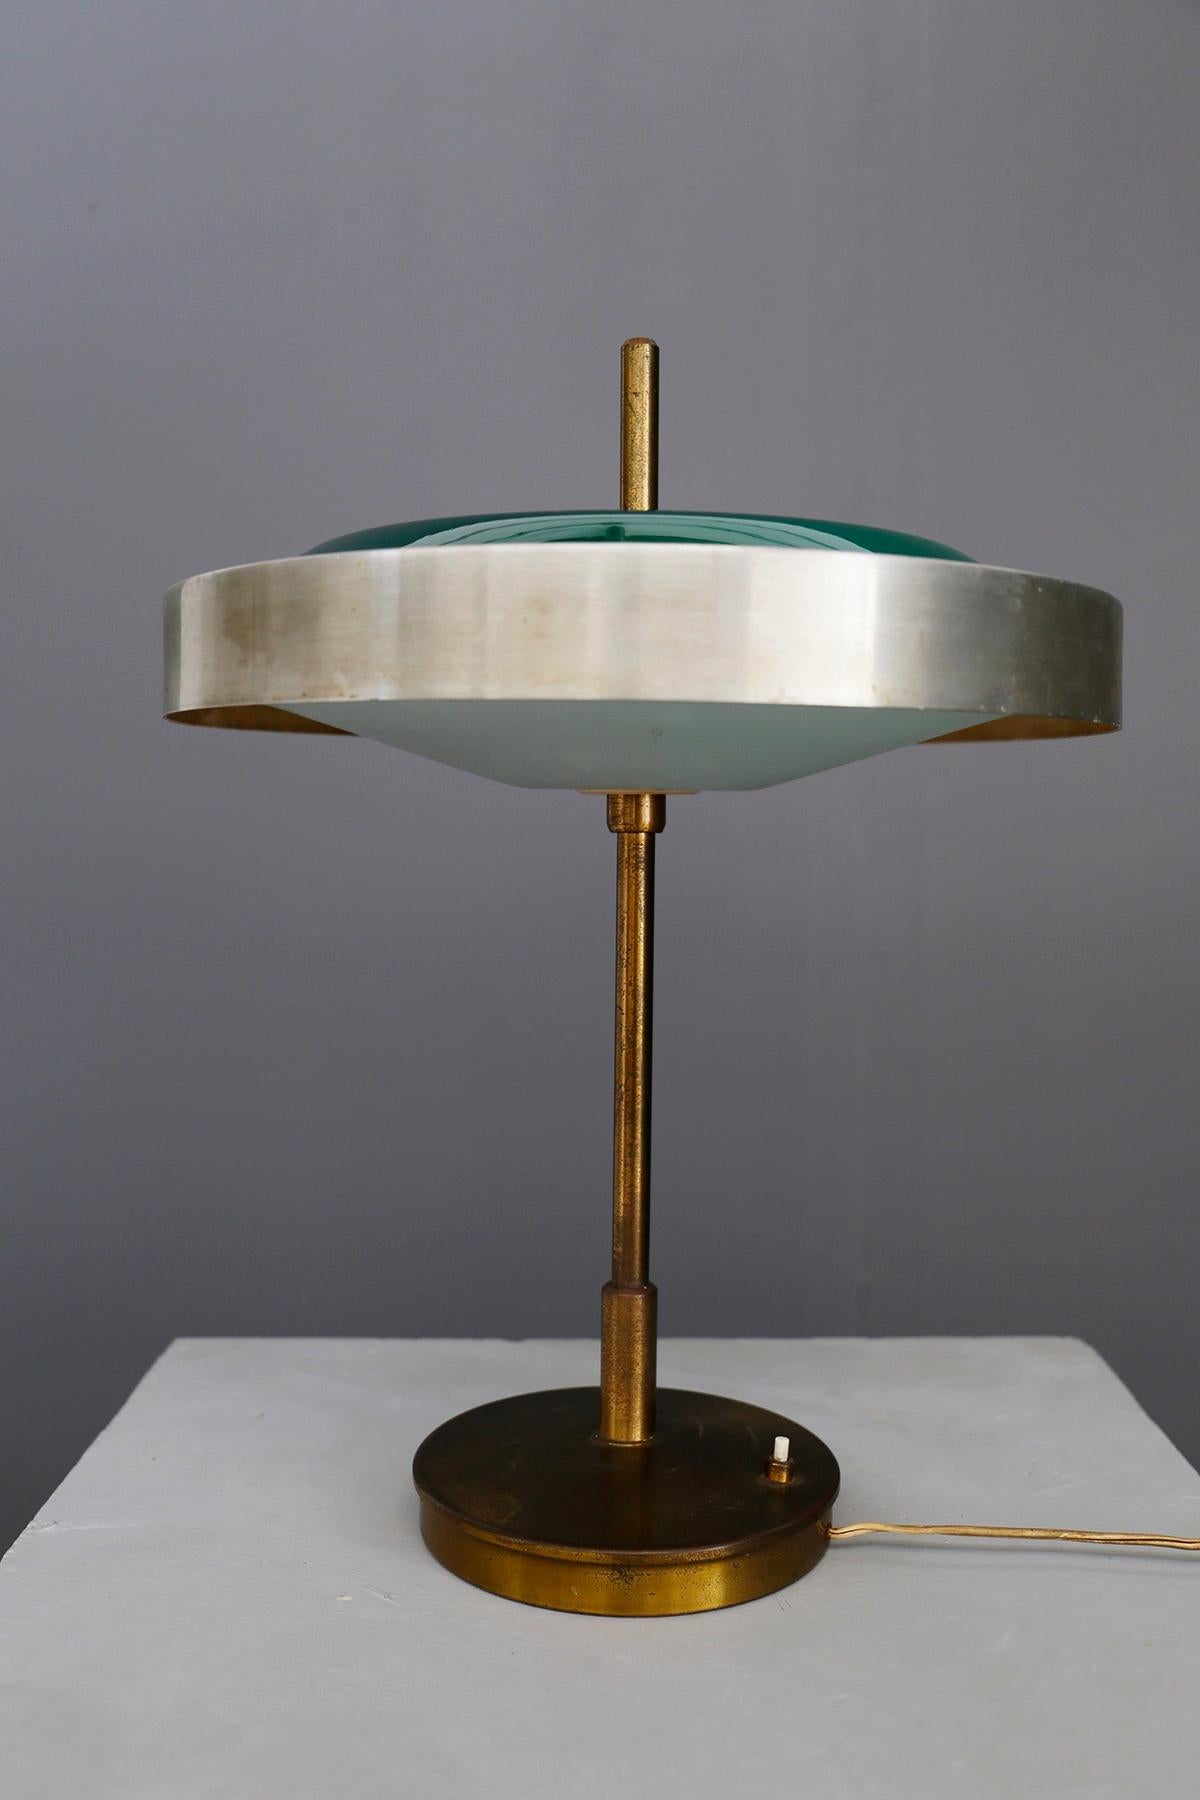 Oscar Torlasco Midcentury Table Lamp in Brass and Cased Glass by Lumi 1950s (Moderne der Mitte des Jahrhunderts)